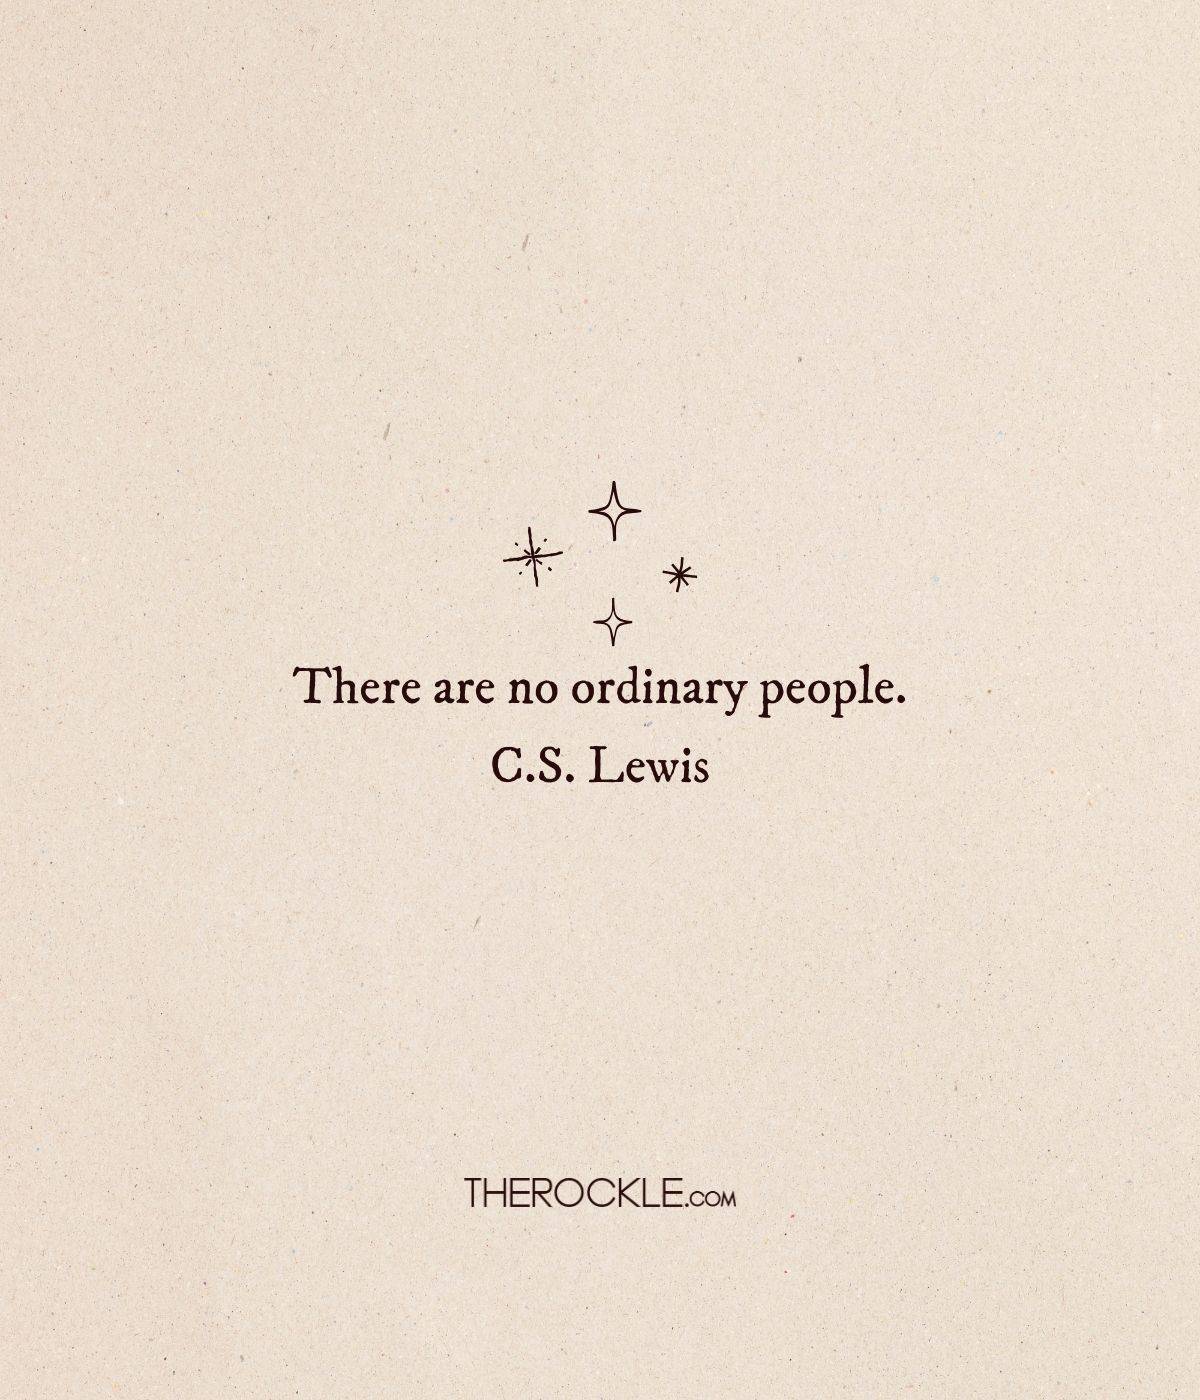 C.S. Lewis quote about extraordinary people